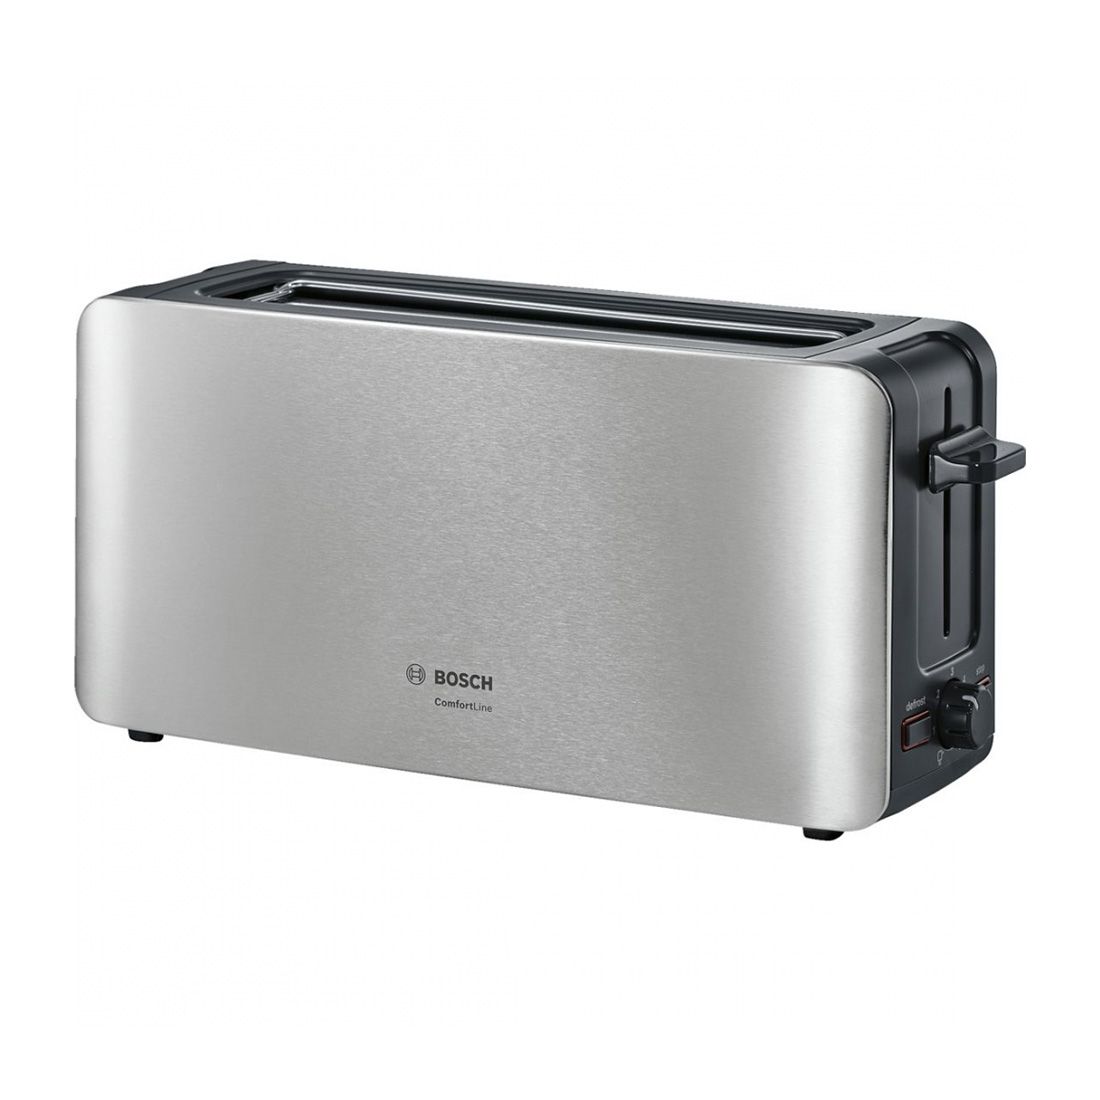 RUSSELL HOBBS Grille-pain gris 2 tranches au Maroc